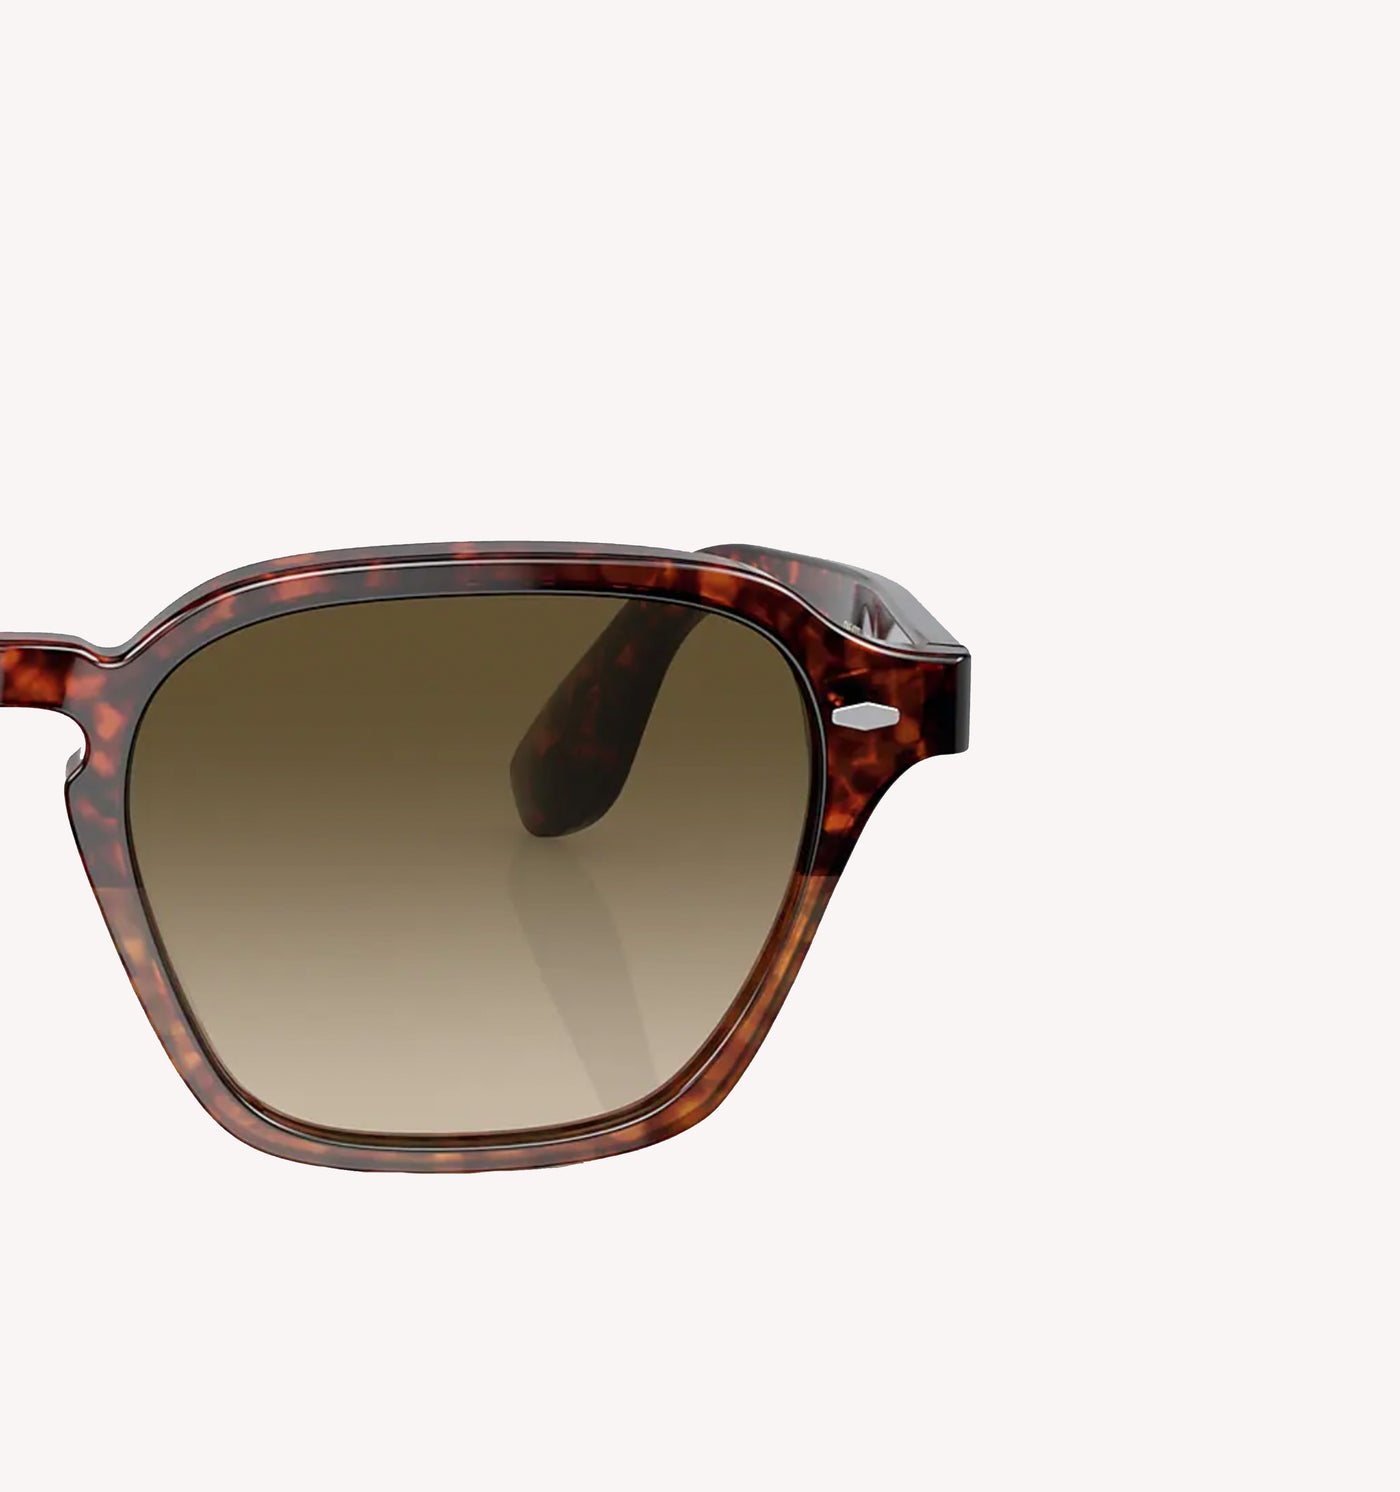 Oliver Peoples X Brunello Cucinelli Griffo Sunglasses in Vintage Tortoise